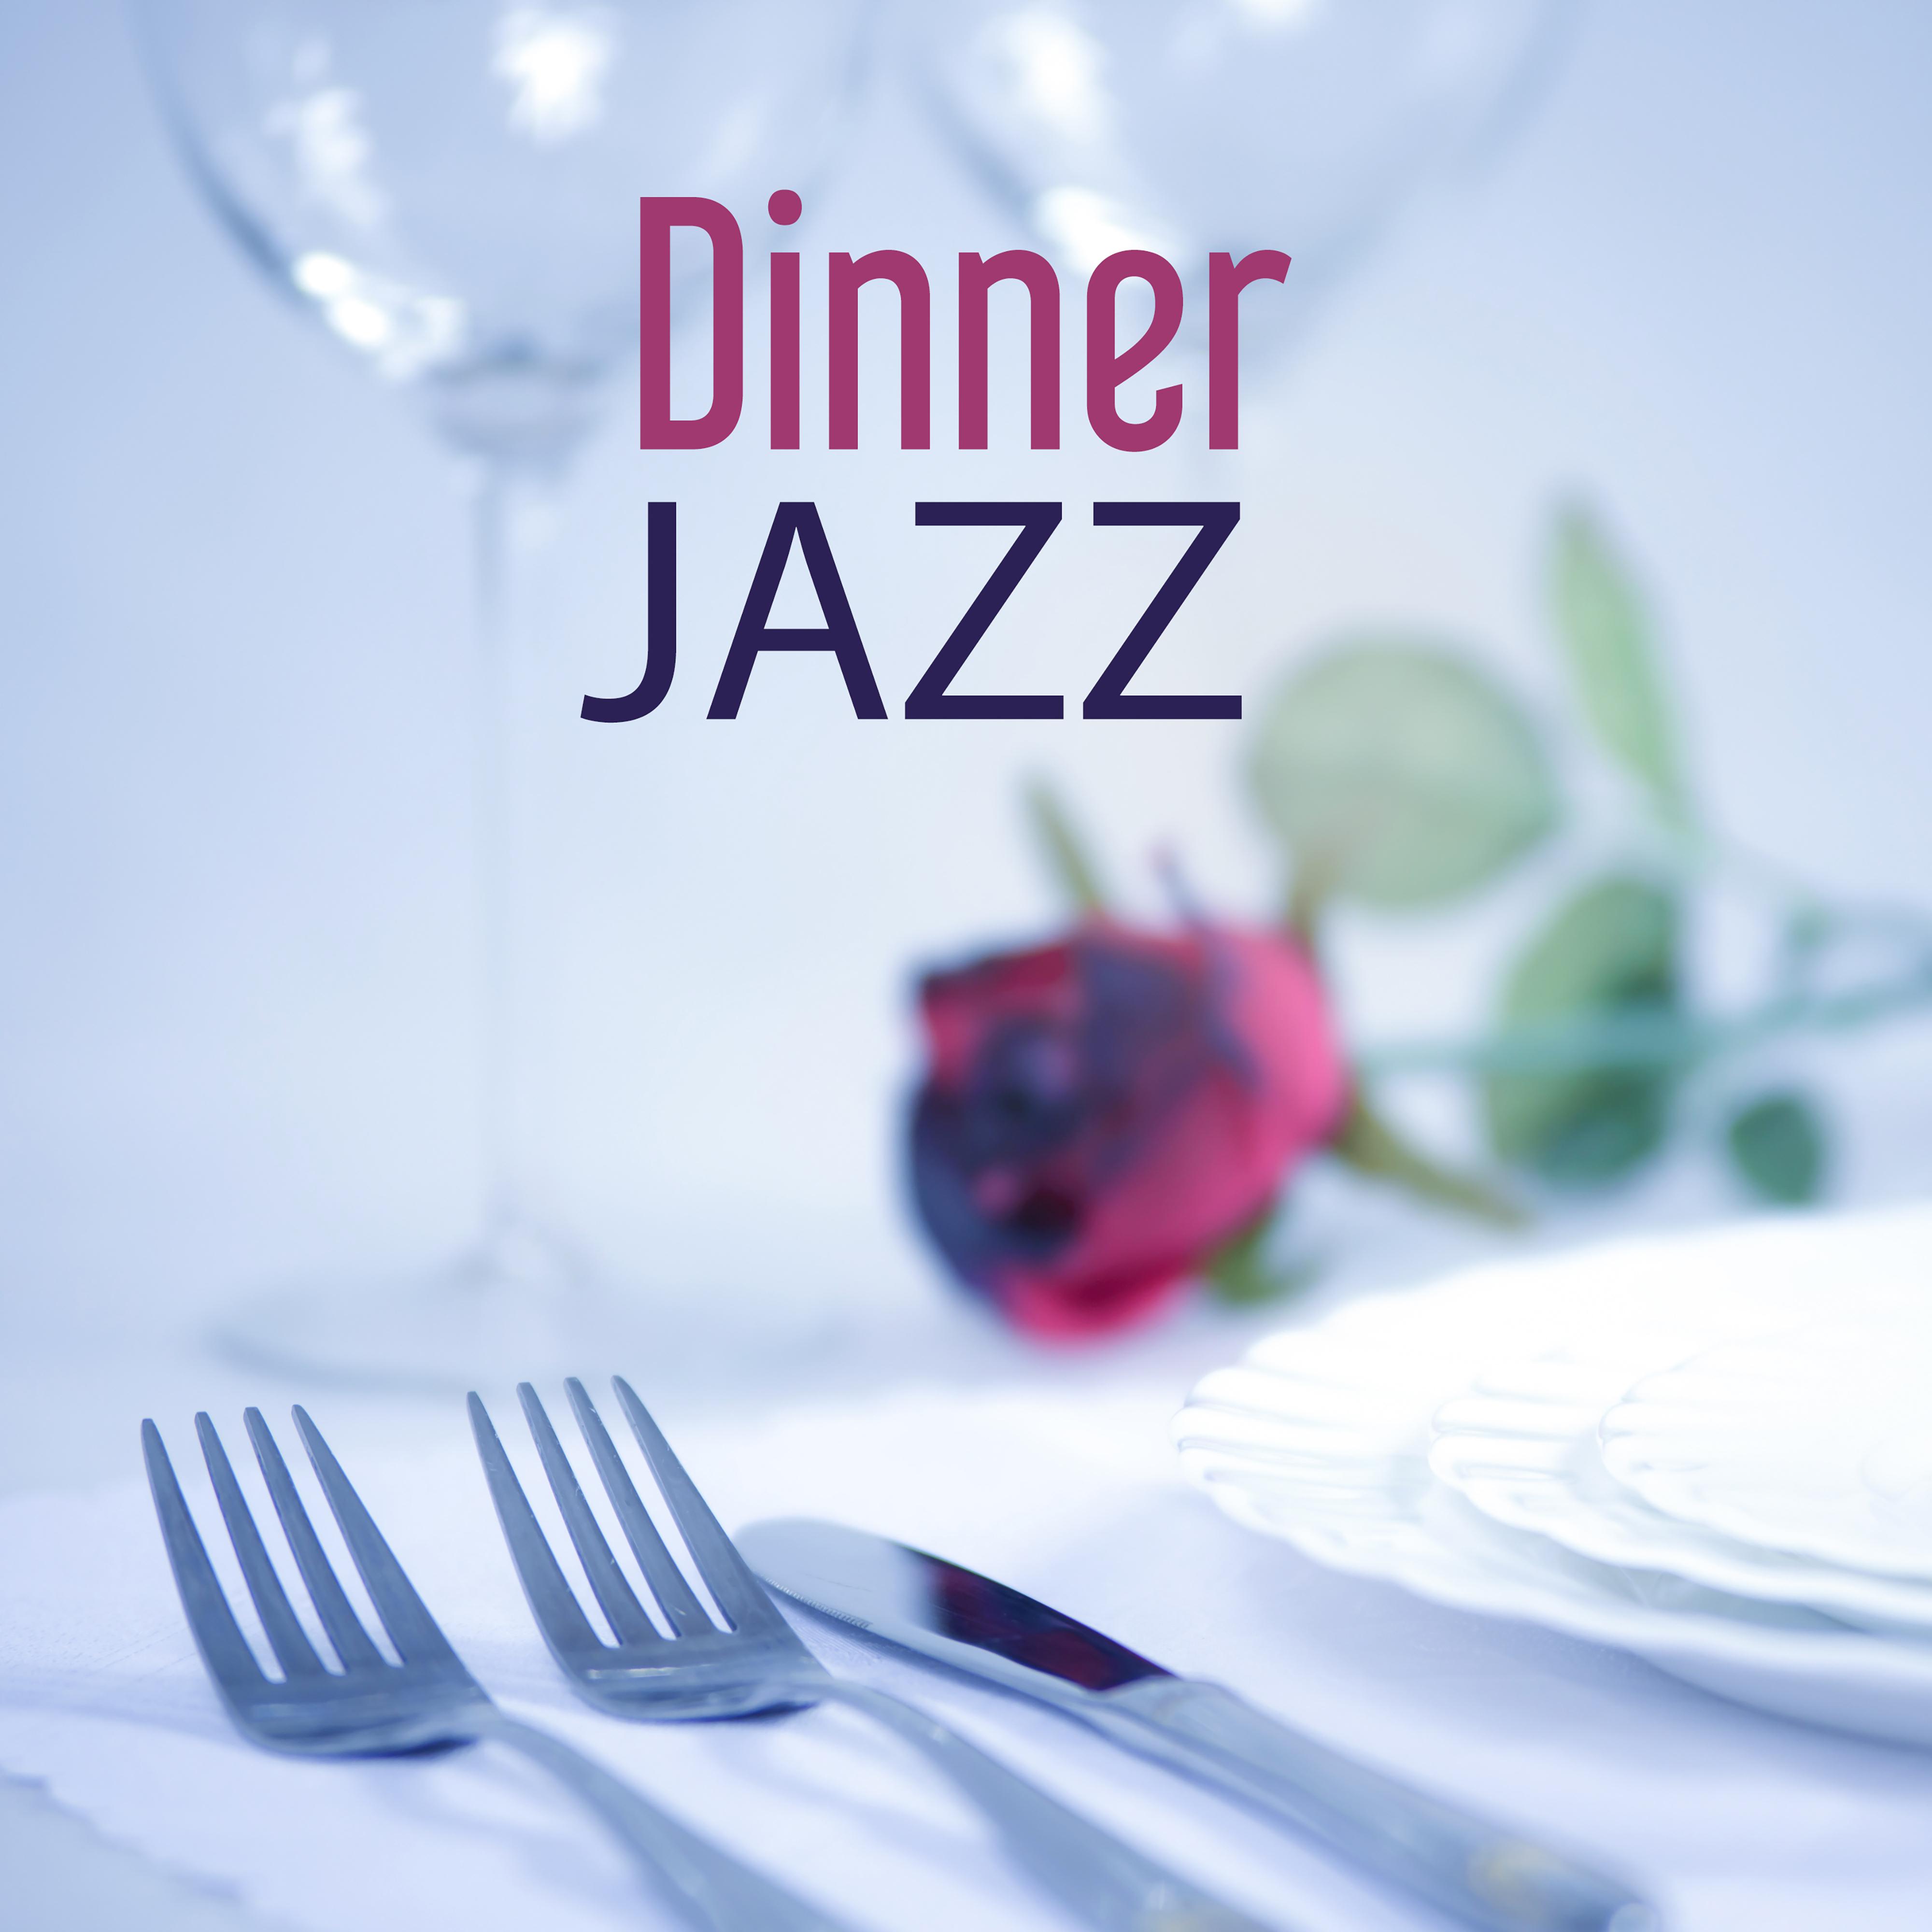 Dinner Jazz  Pure Instrumental Jazz, Music for Dinner, Mellow Piano Sounds